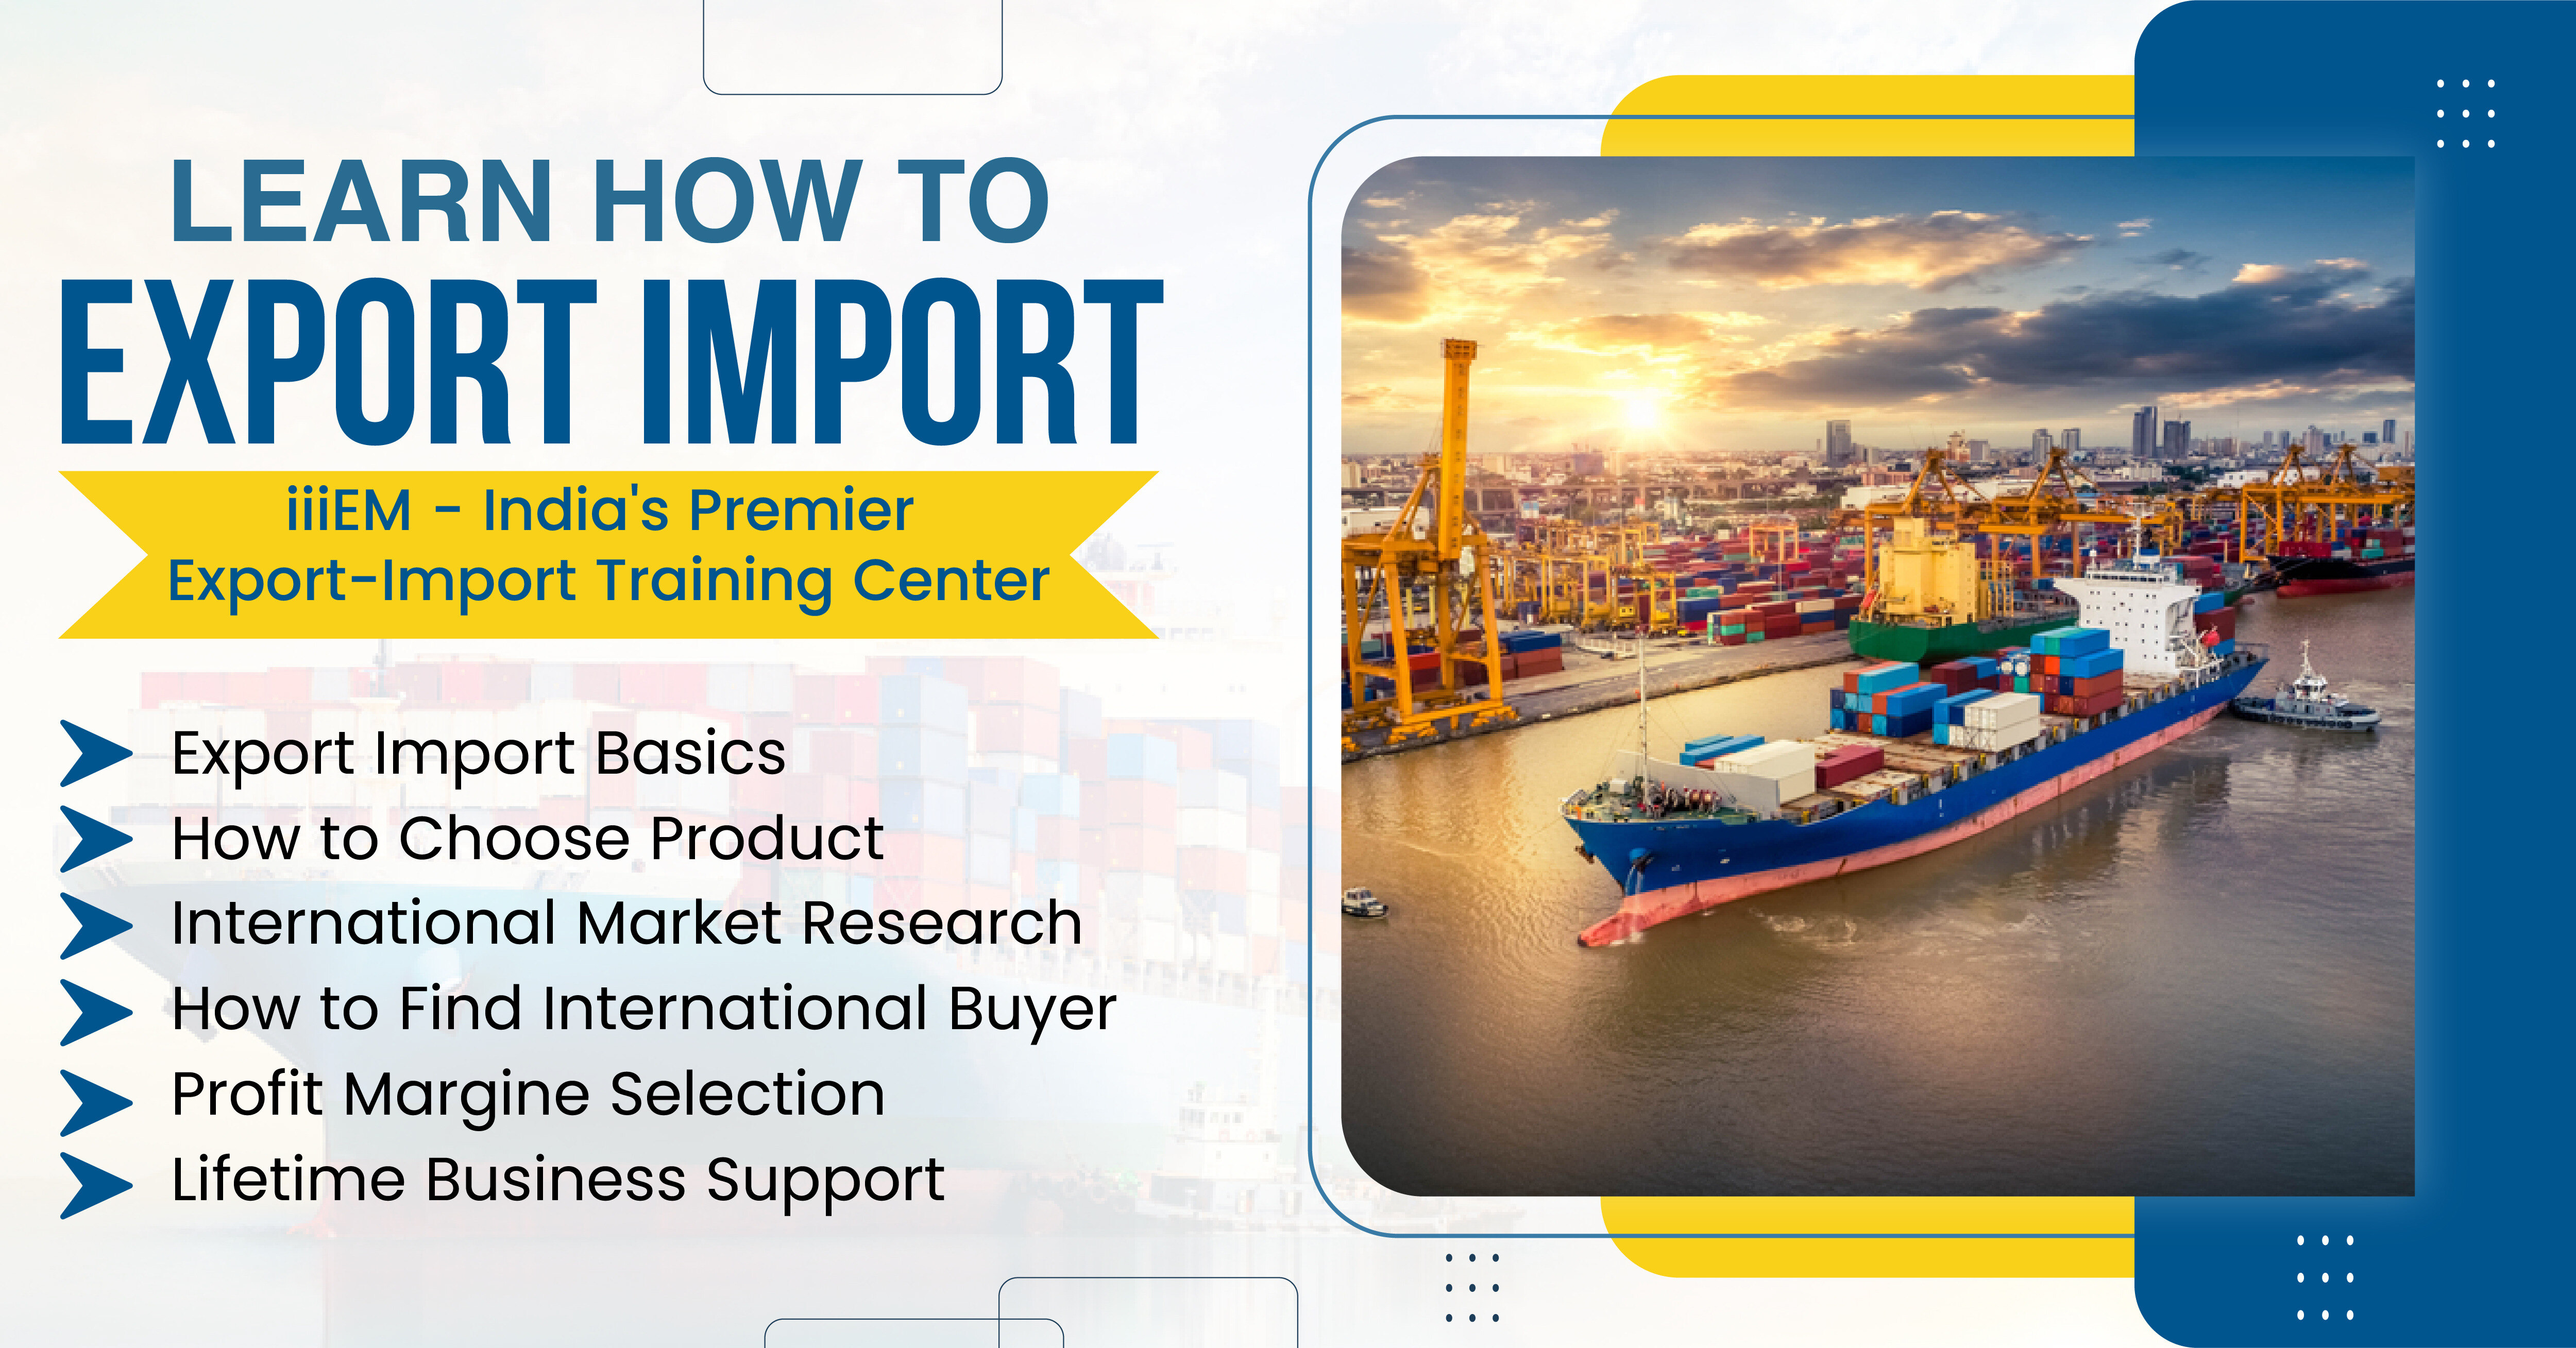 Certified Export Import Business Training in Ahmedabad, Ahmedabad, Gujarat, India